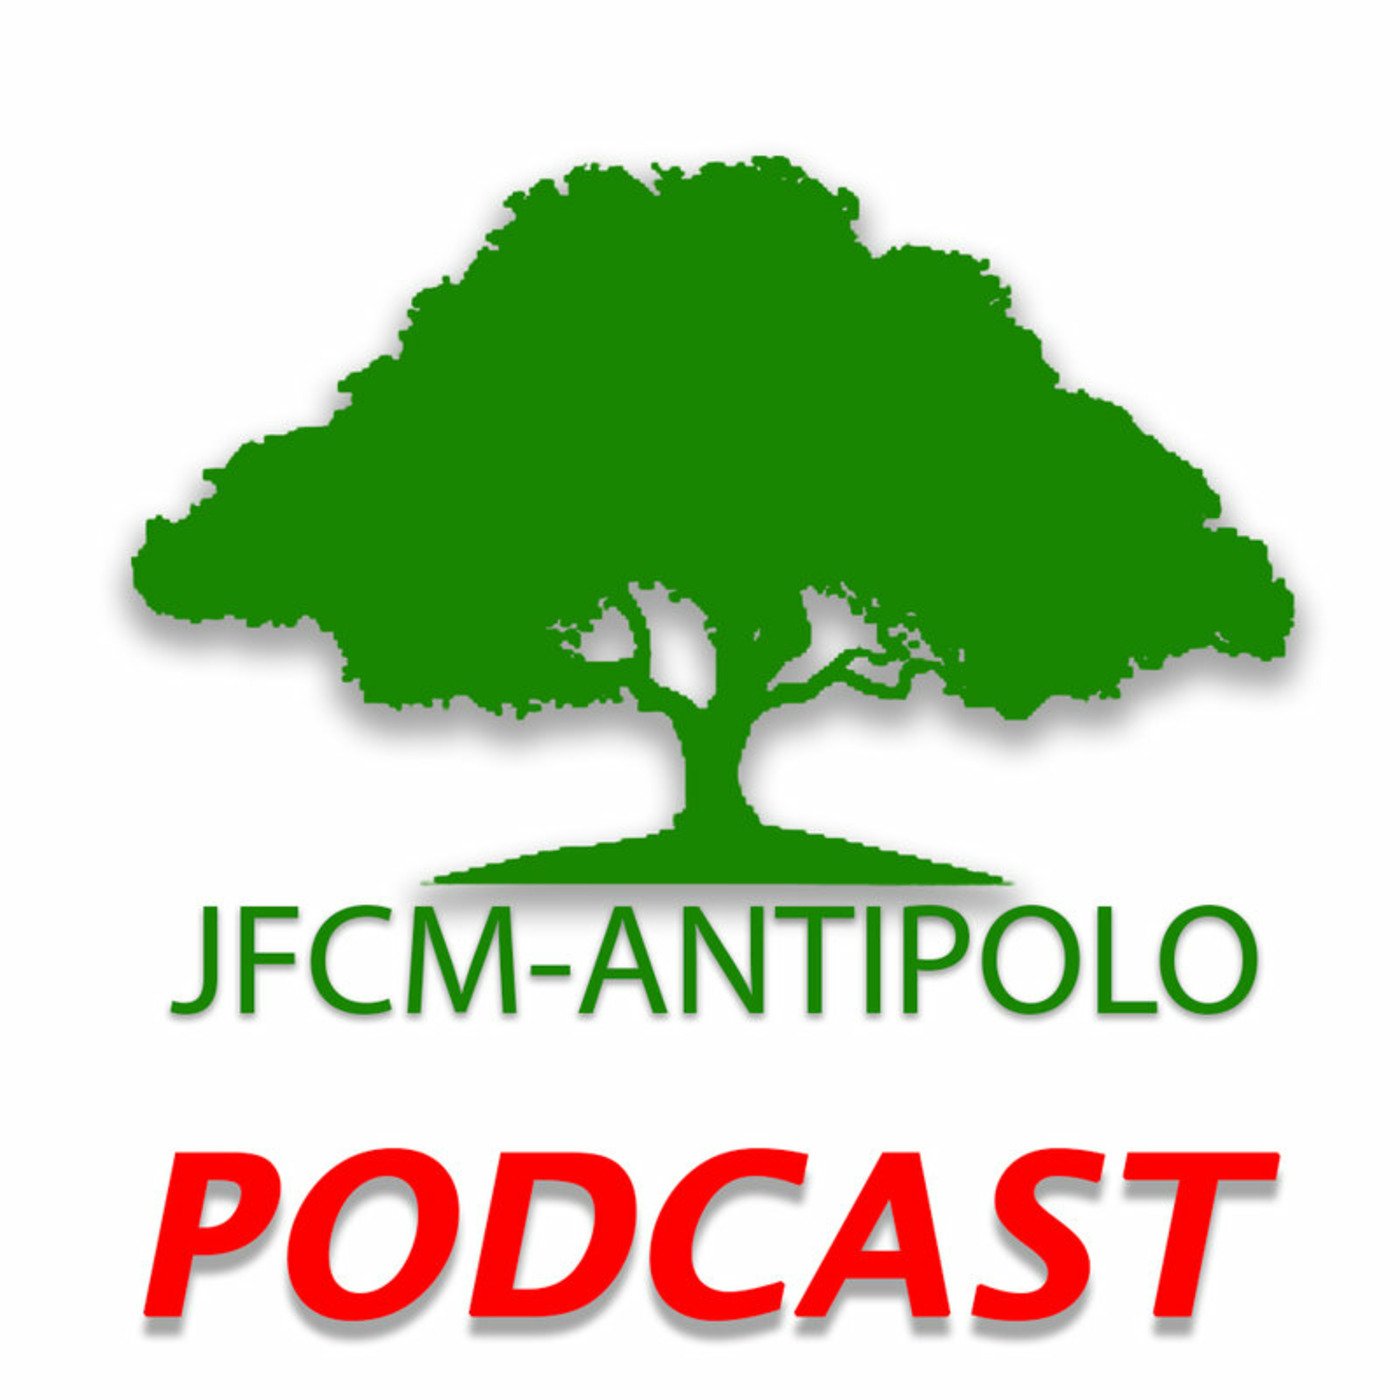 JFCM Antipolo Podcast -Father's Day Message